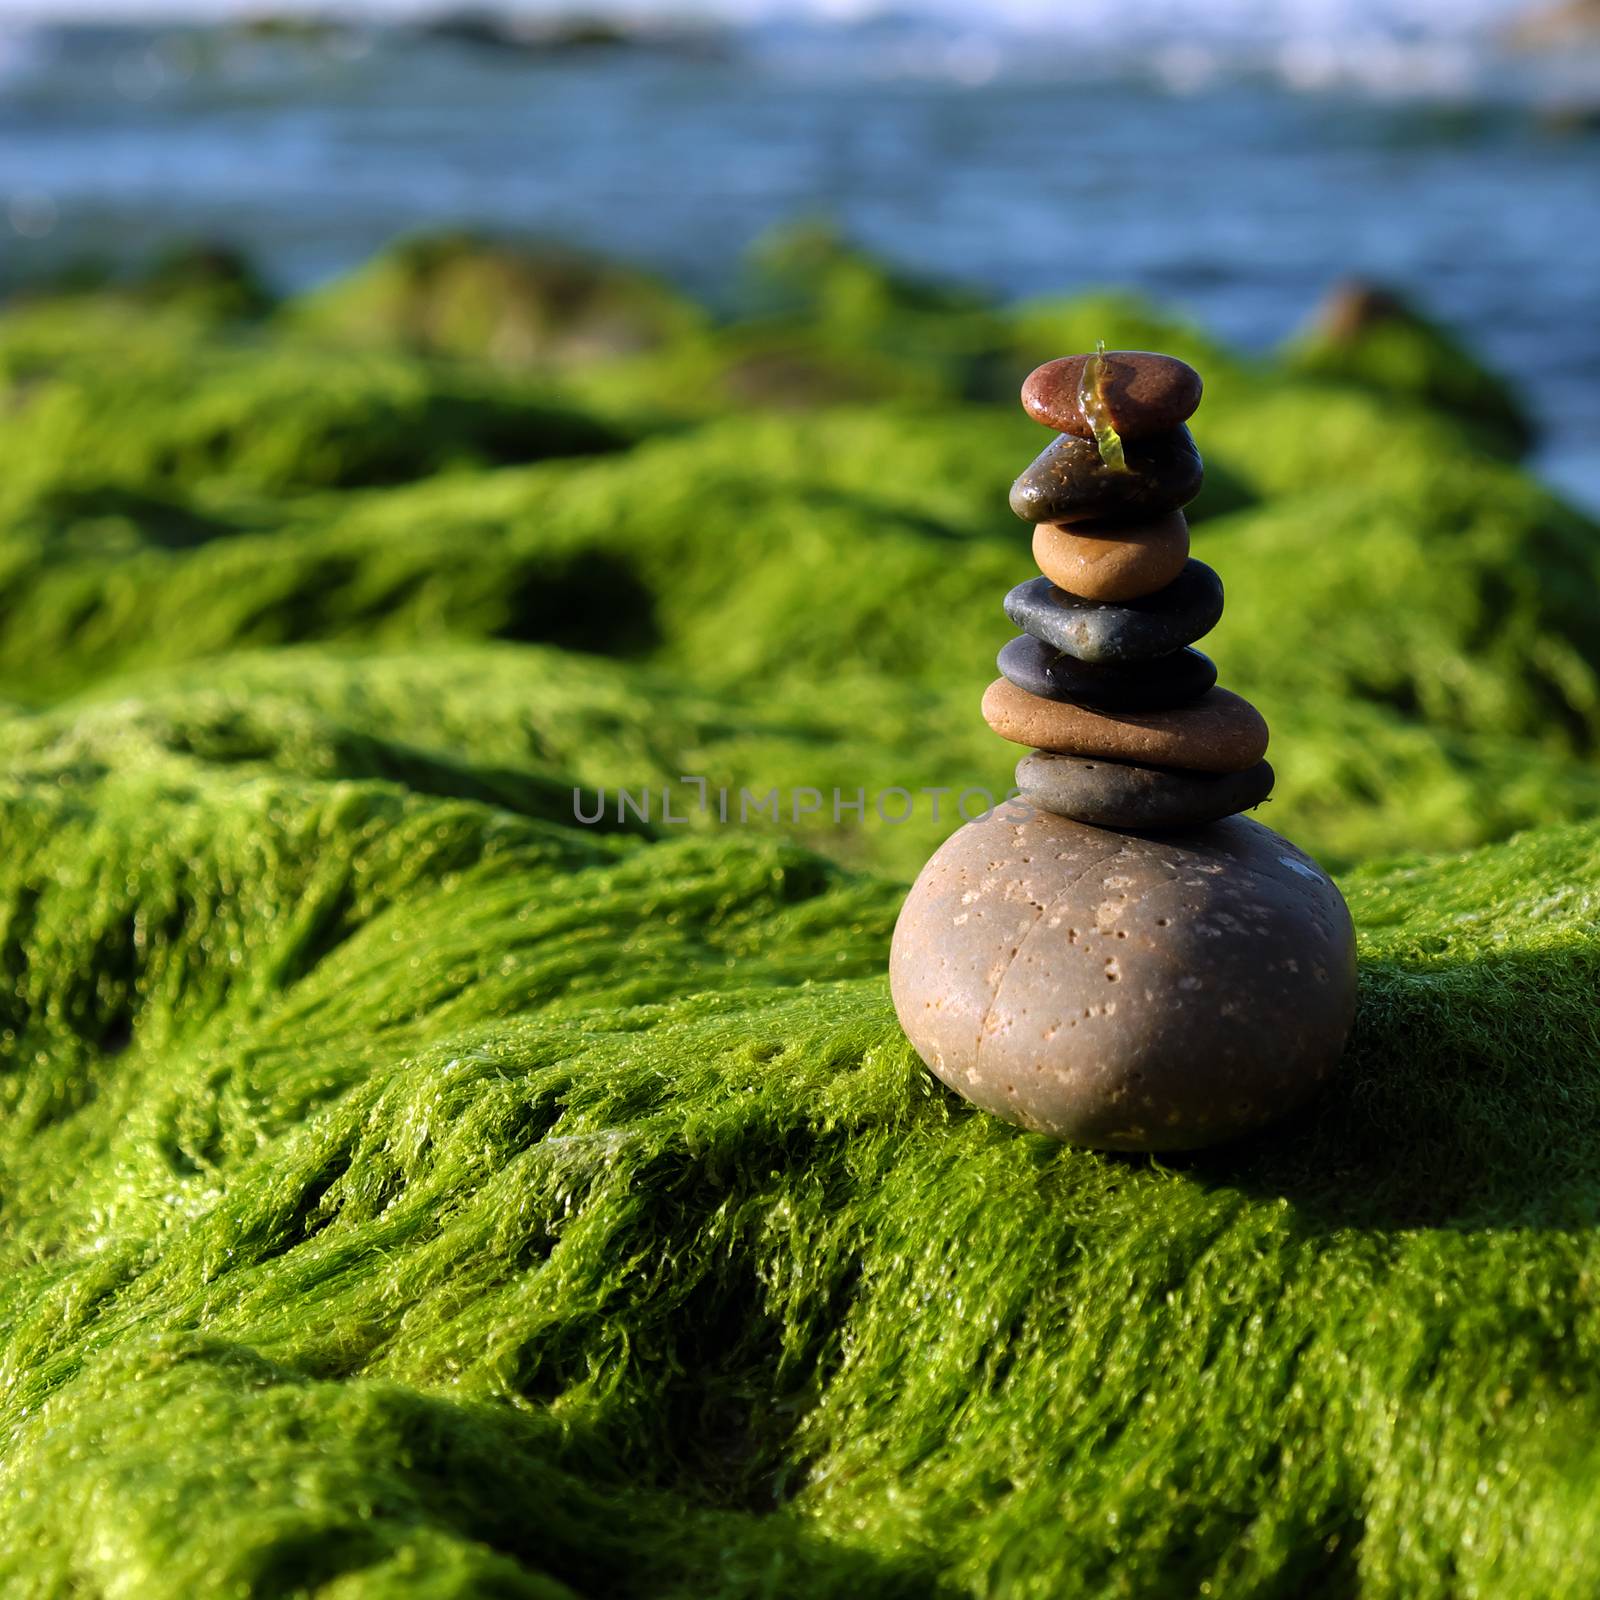 Amazing stack of stones on green moss at seaside beach, group of pebble balance on large rock as meditation, concept for Zen or strong mind or teamwork spirit